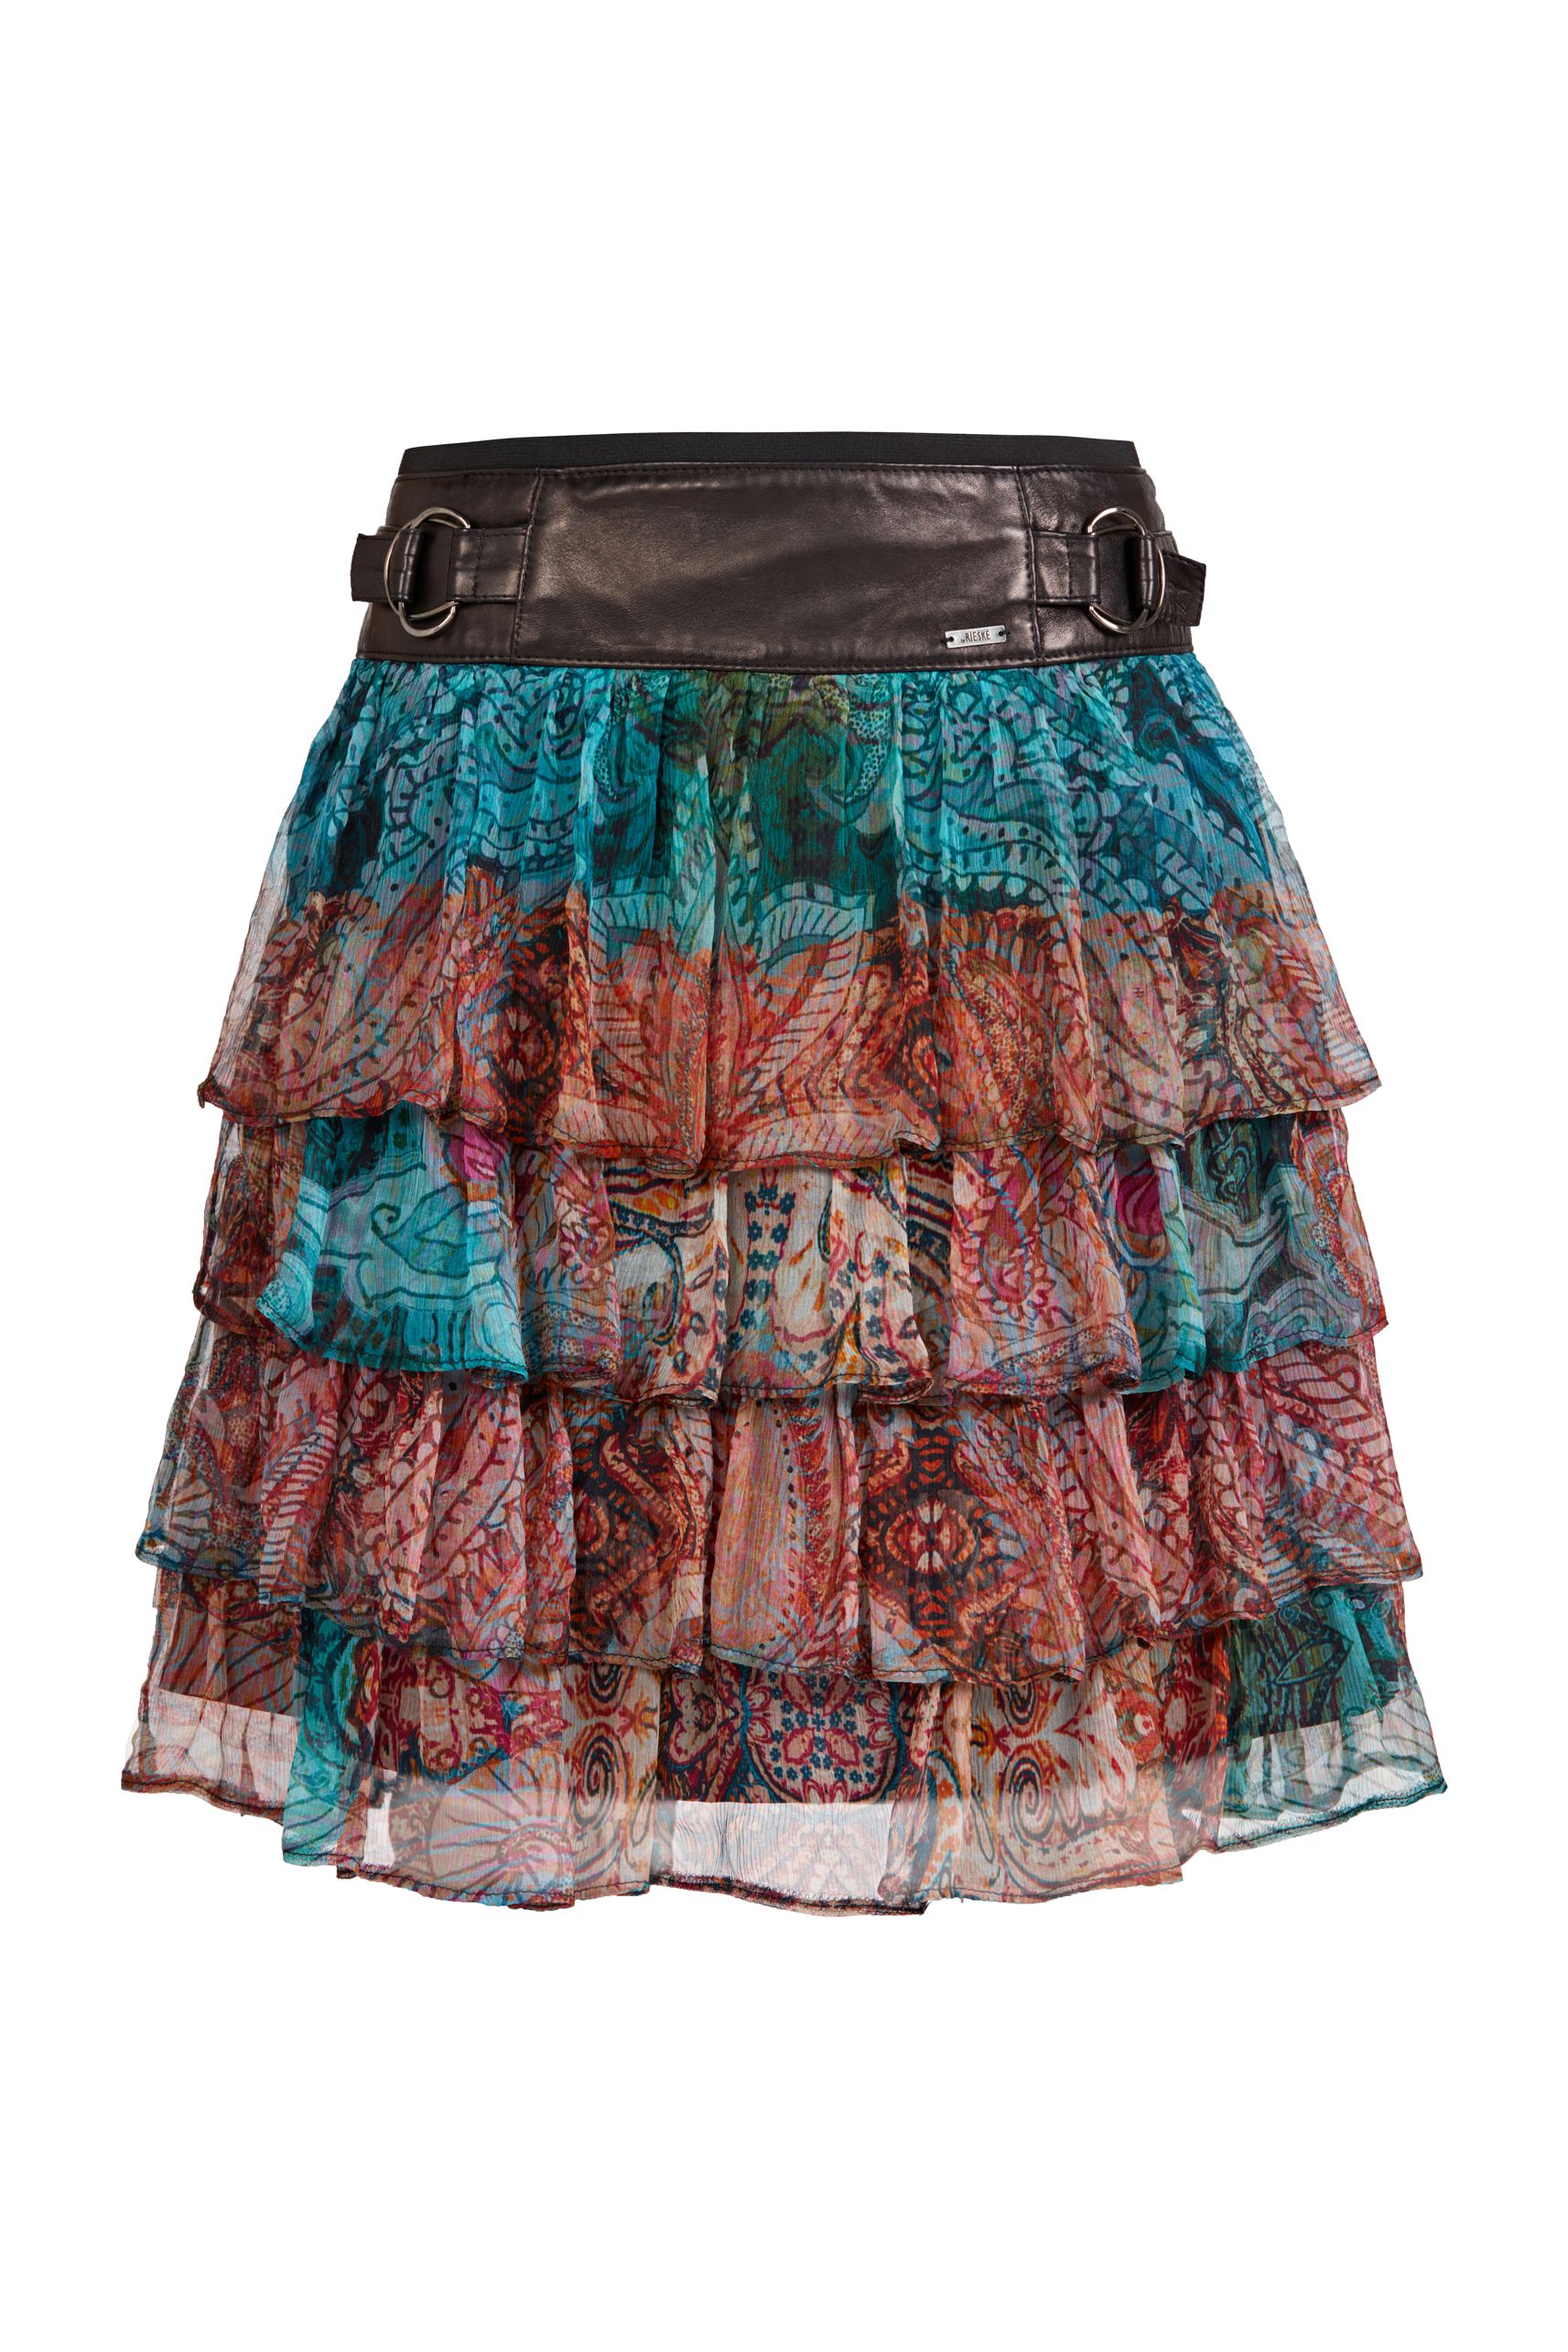 skirt made of silk and leather, silk skirt with a leather yoke and ruffles, multicolored skirt, skirt with a yoke made of natural leather and silk chiffon